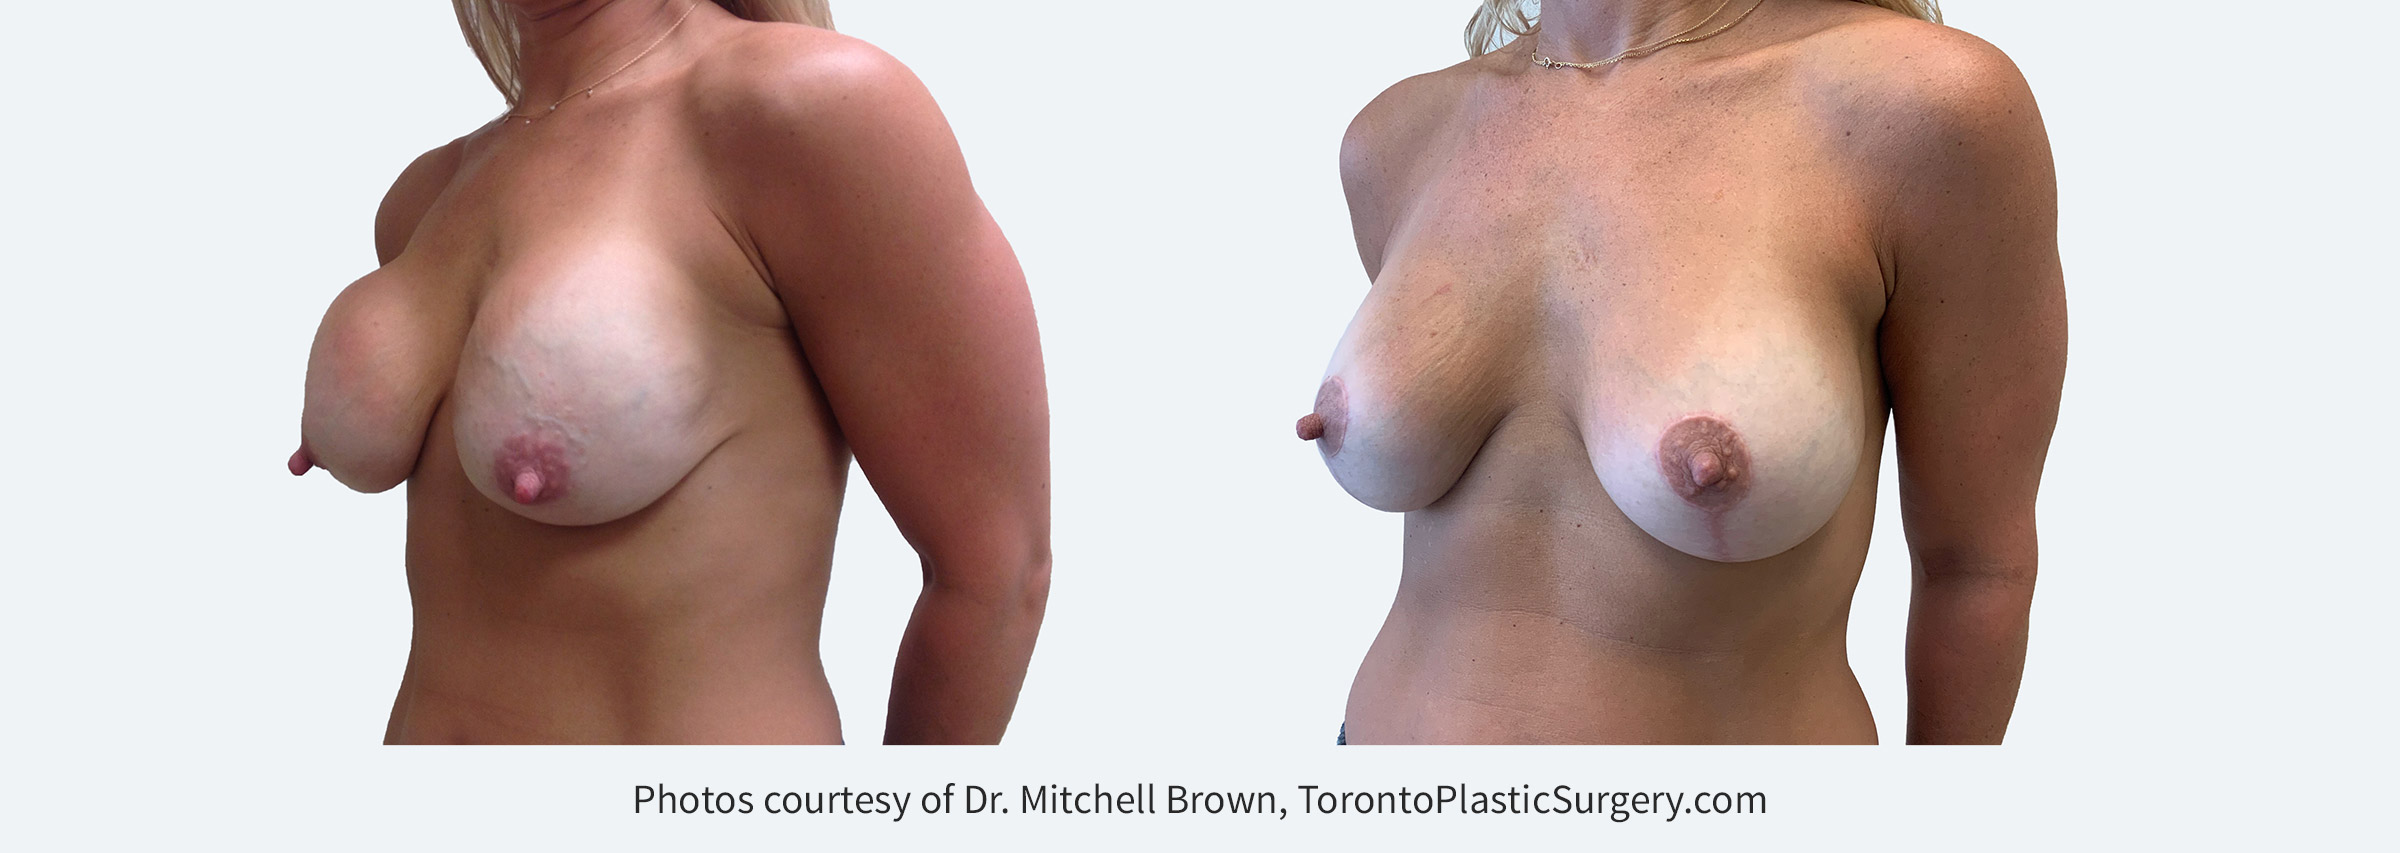 Capsular contracture (scar tissue around implants) and ptosis (sagging) 13 years following breast augmentation. Corrected with removal of old implants and scar tissue, replacement of new 330cc round silicone gel implants under the muscle along with a breast lift. Before and 6 months after.